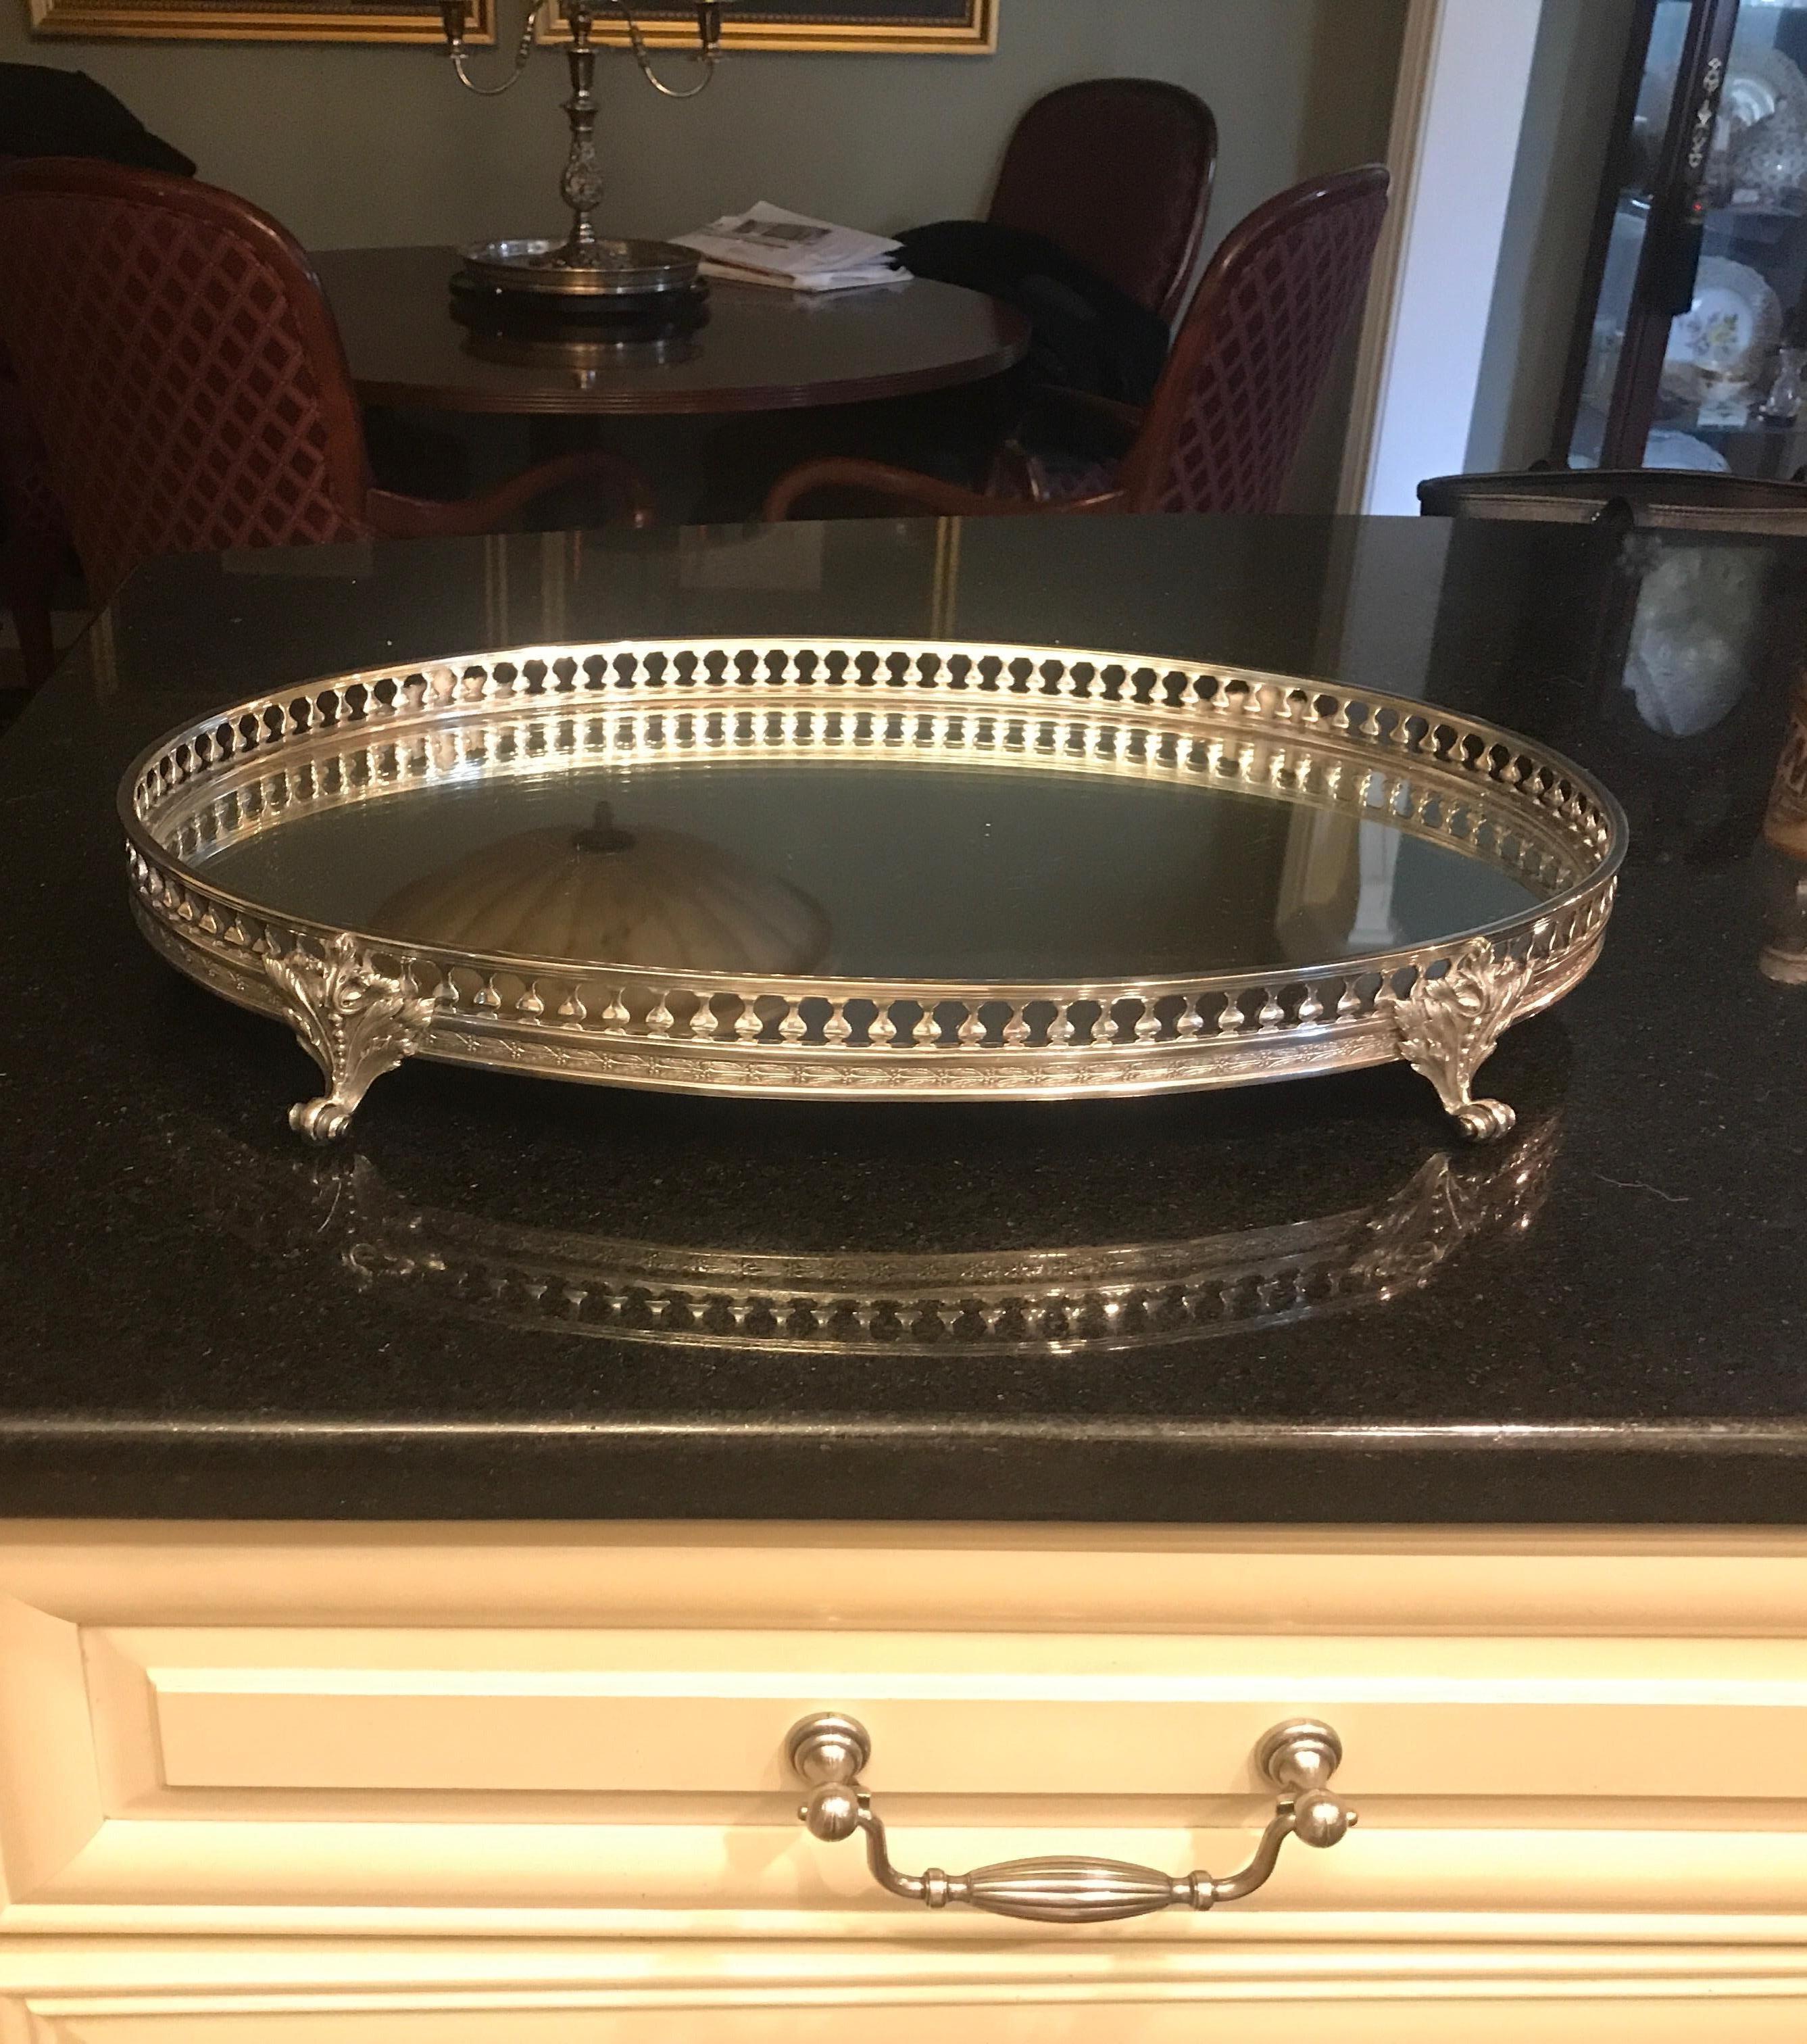 A cast and silver plated bronze framed oval plateau with mirrored surface. An elegant way to feature a prized pieces of silver or collection of smaller items, The original mirrored surface with a few light scratches, the silvering on the mirror and